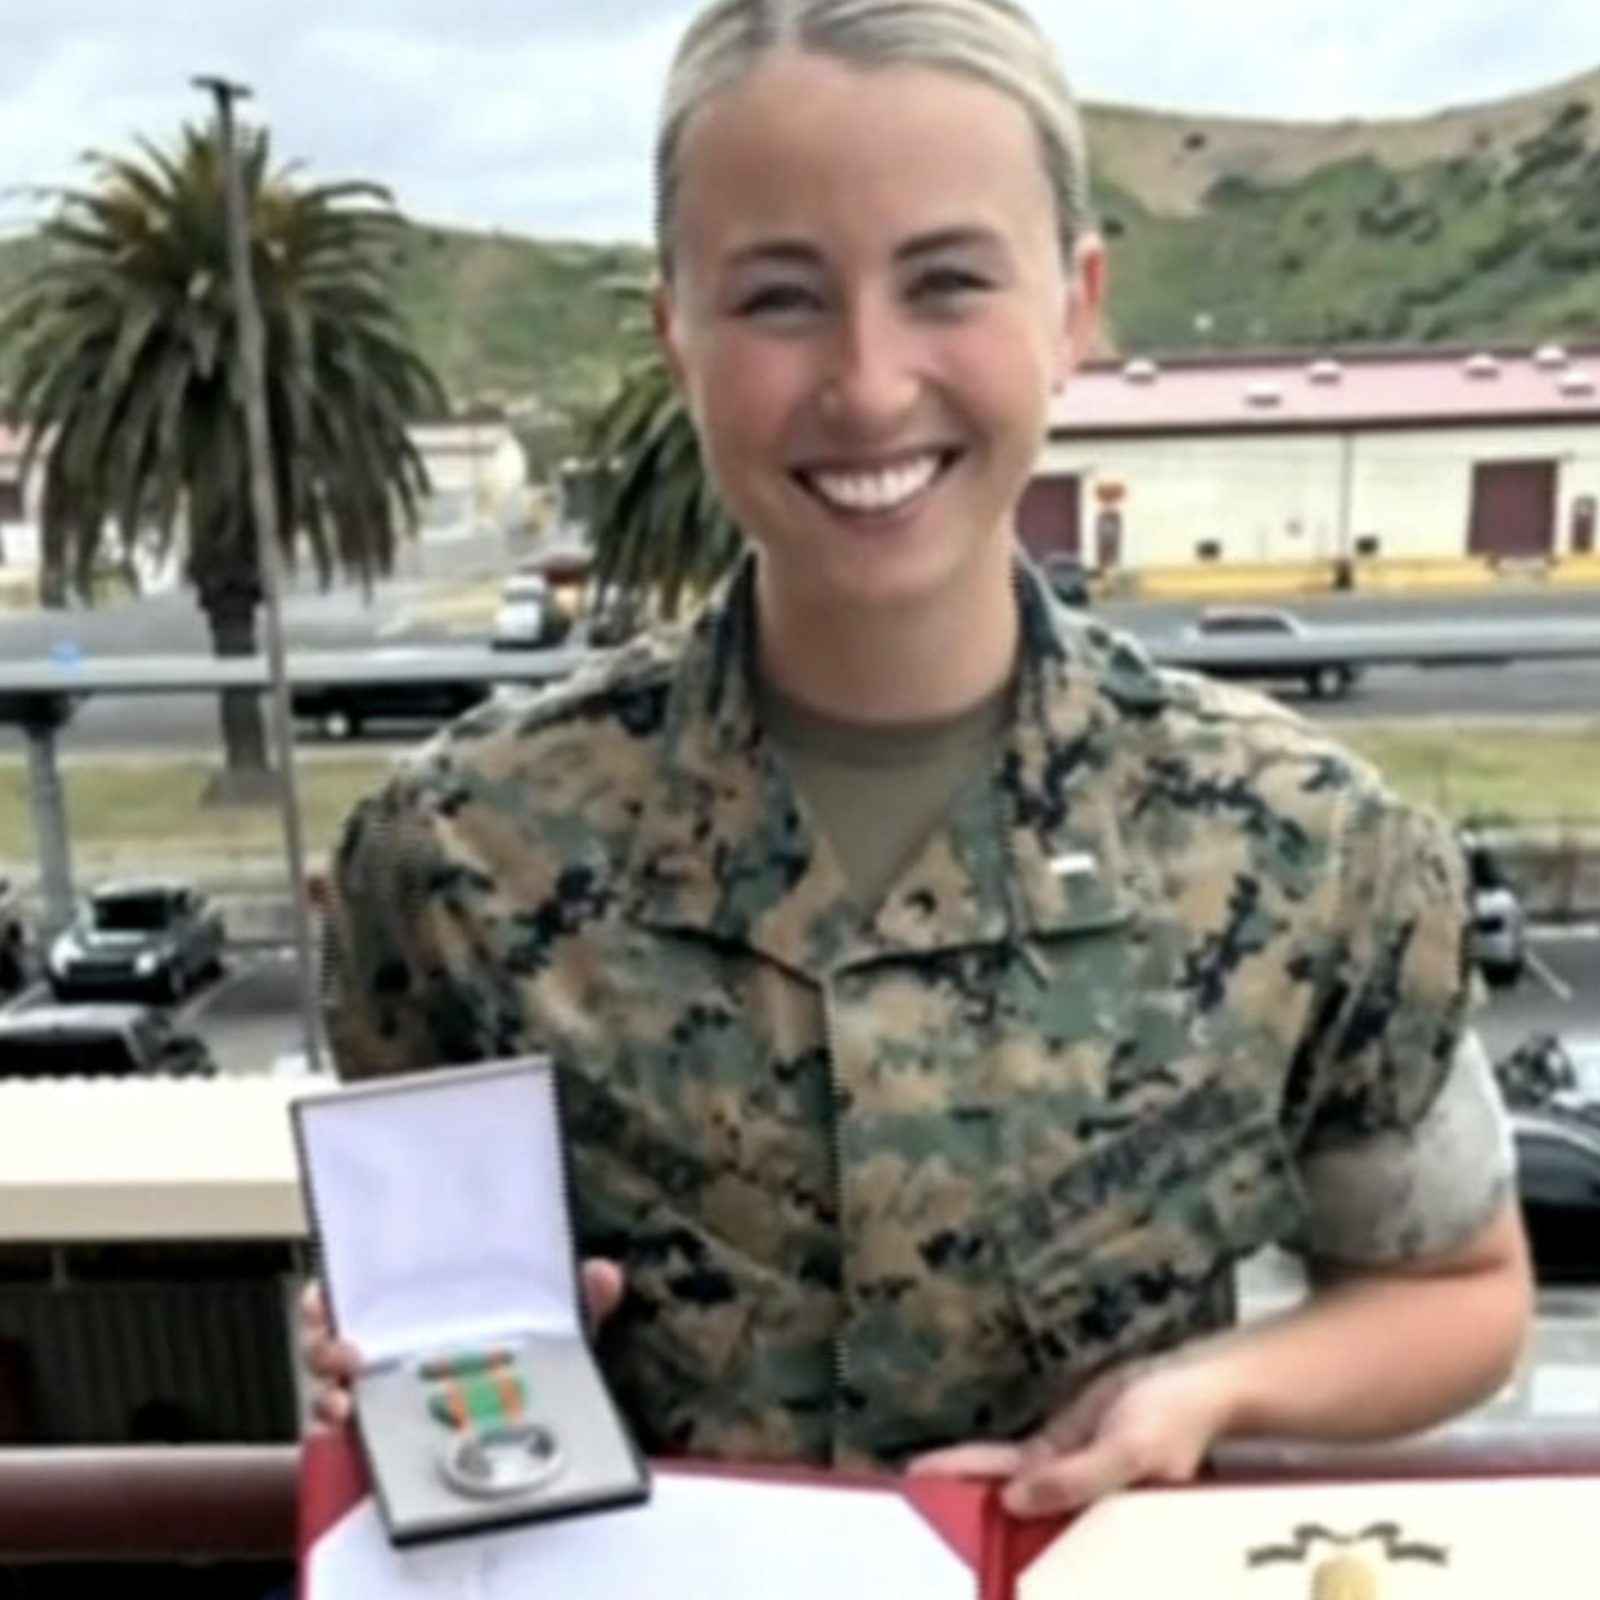 miss military 2023 and marine captain, riley tejcek trains for olympic first